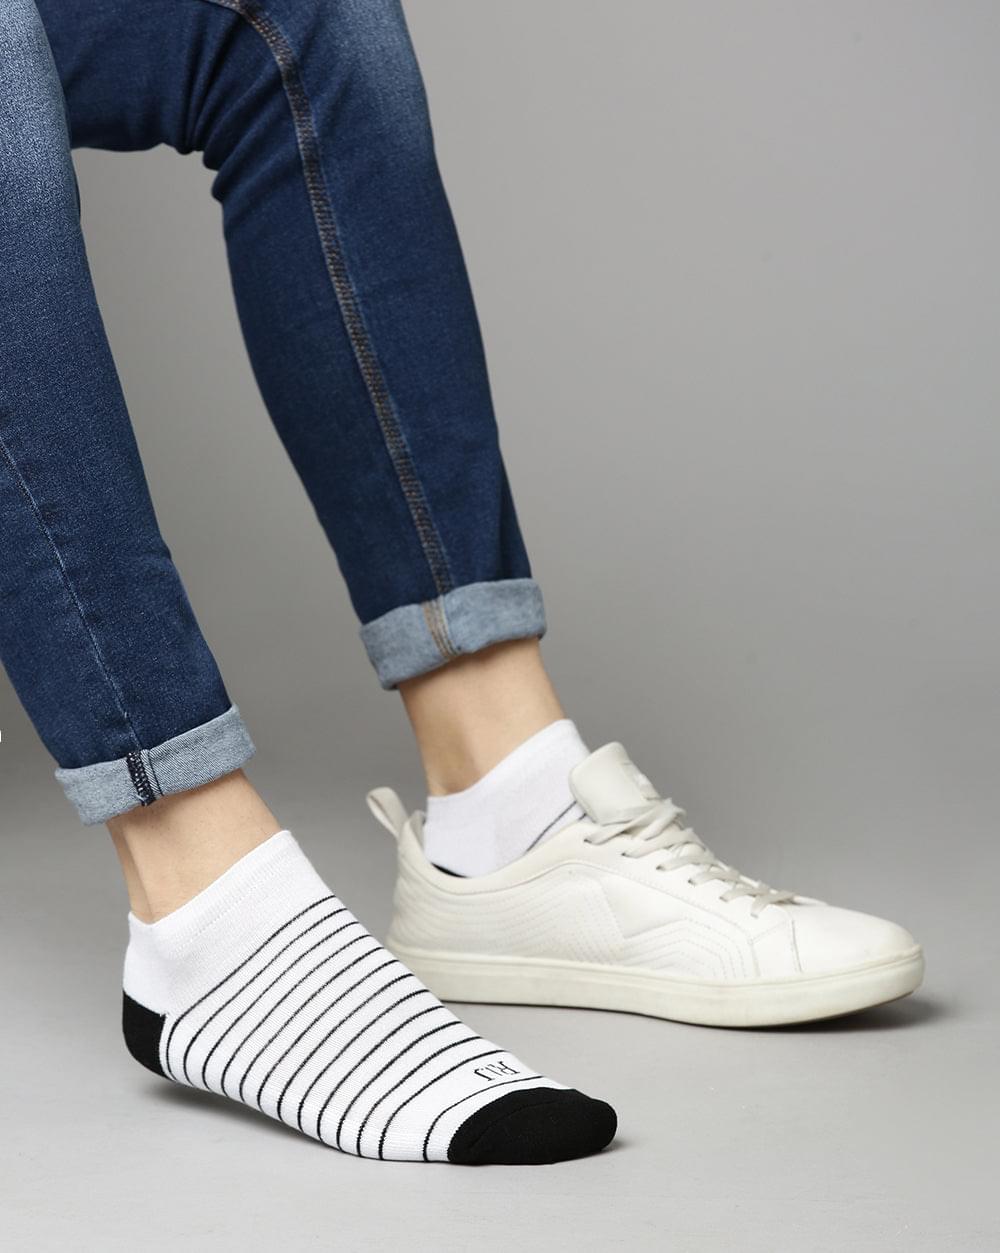 ANKLE SOCKS - STRIPED AND COLOR BLOCKED